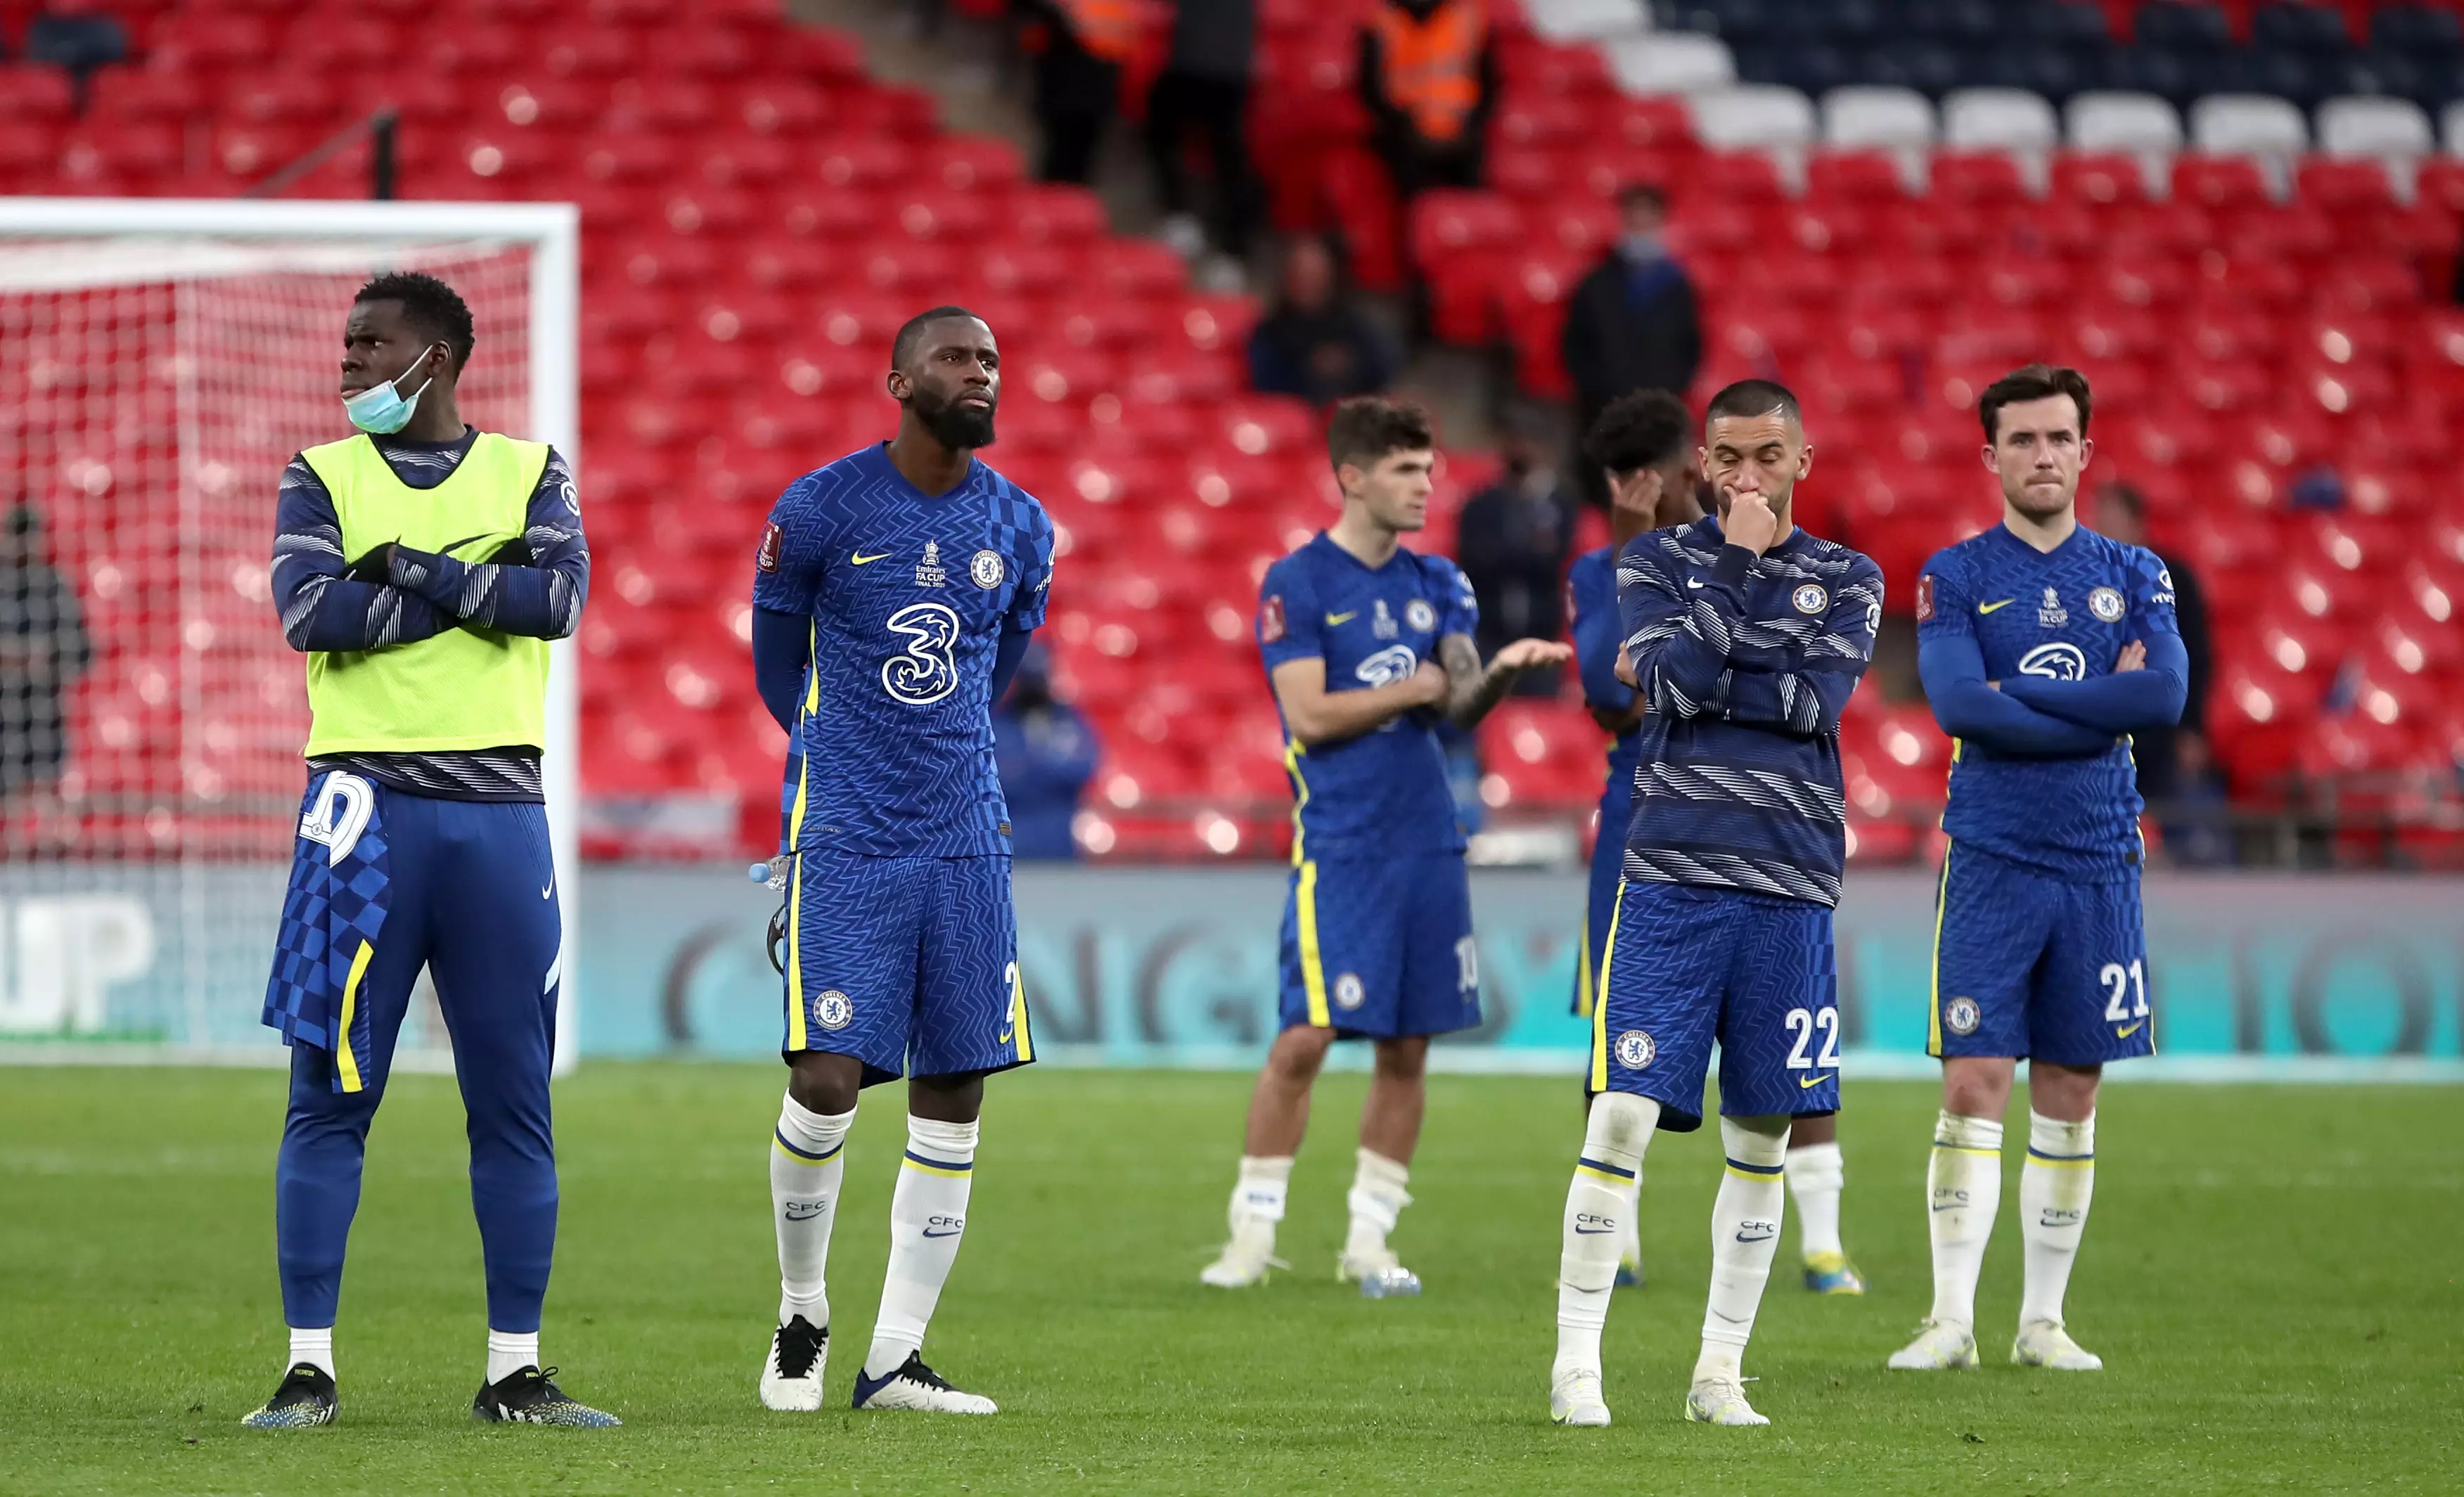 Chelsea players look on as Leicester celebrate their win. Image: PA Images